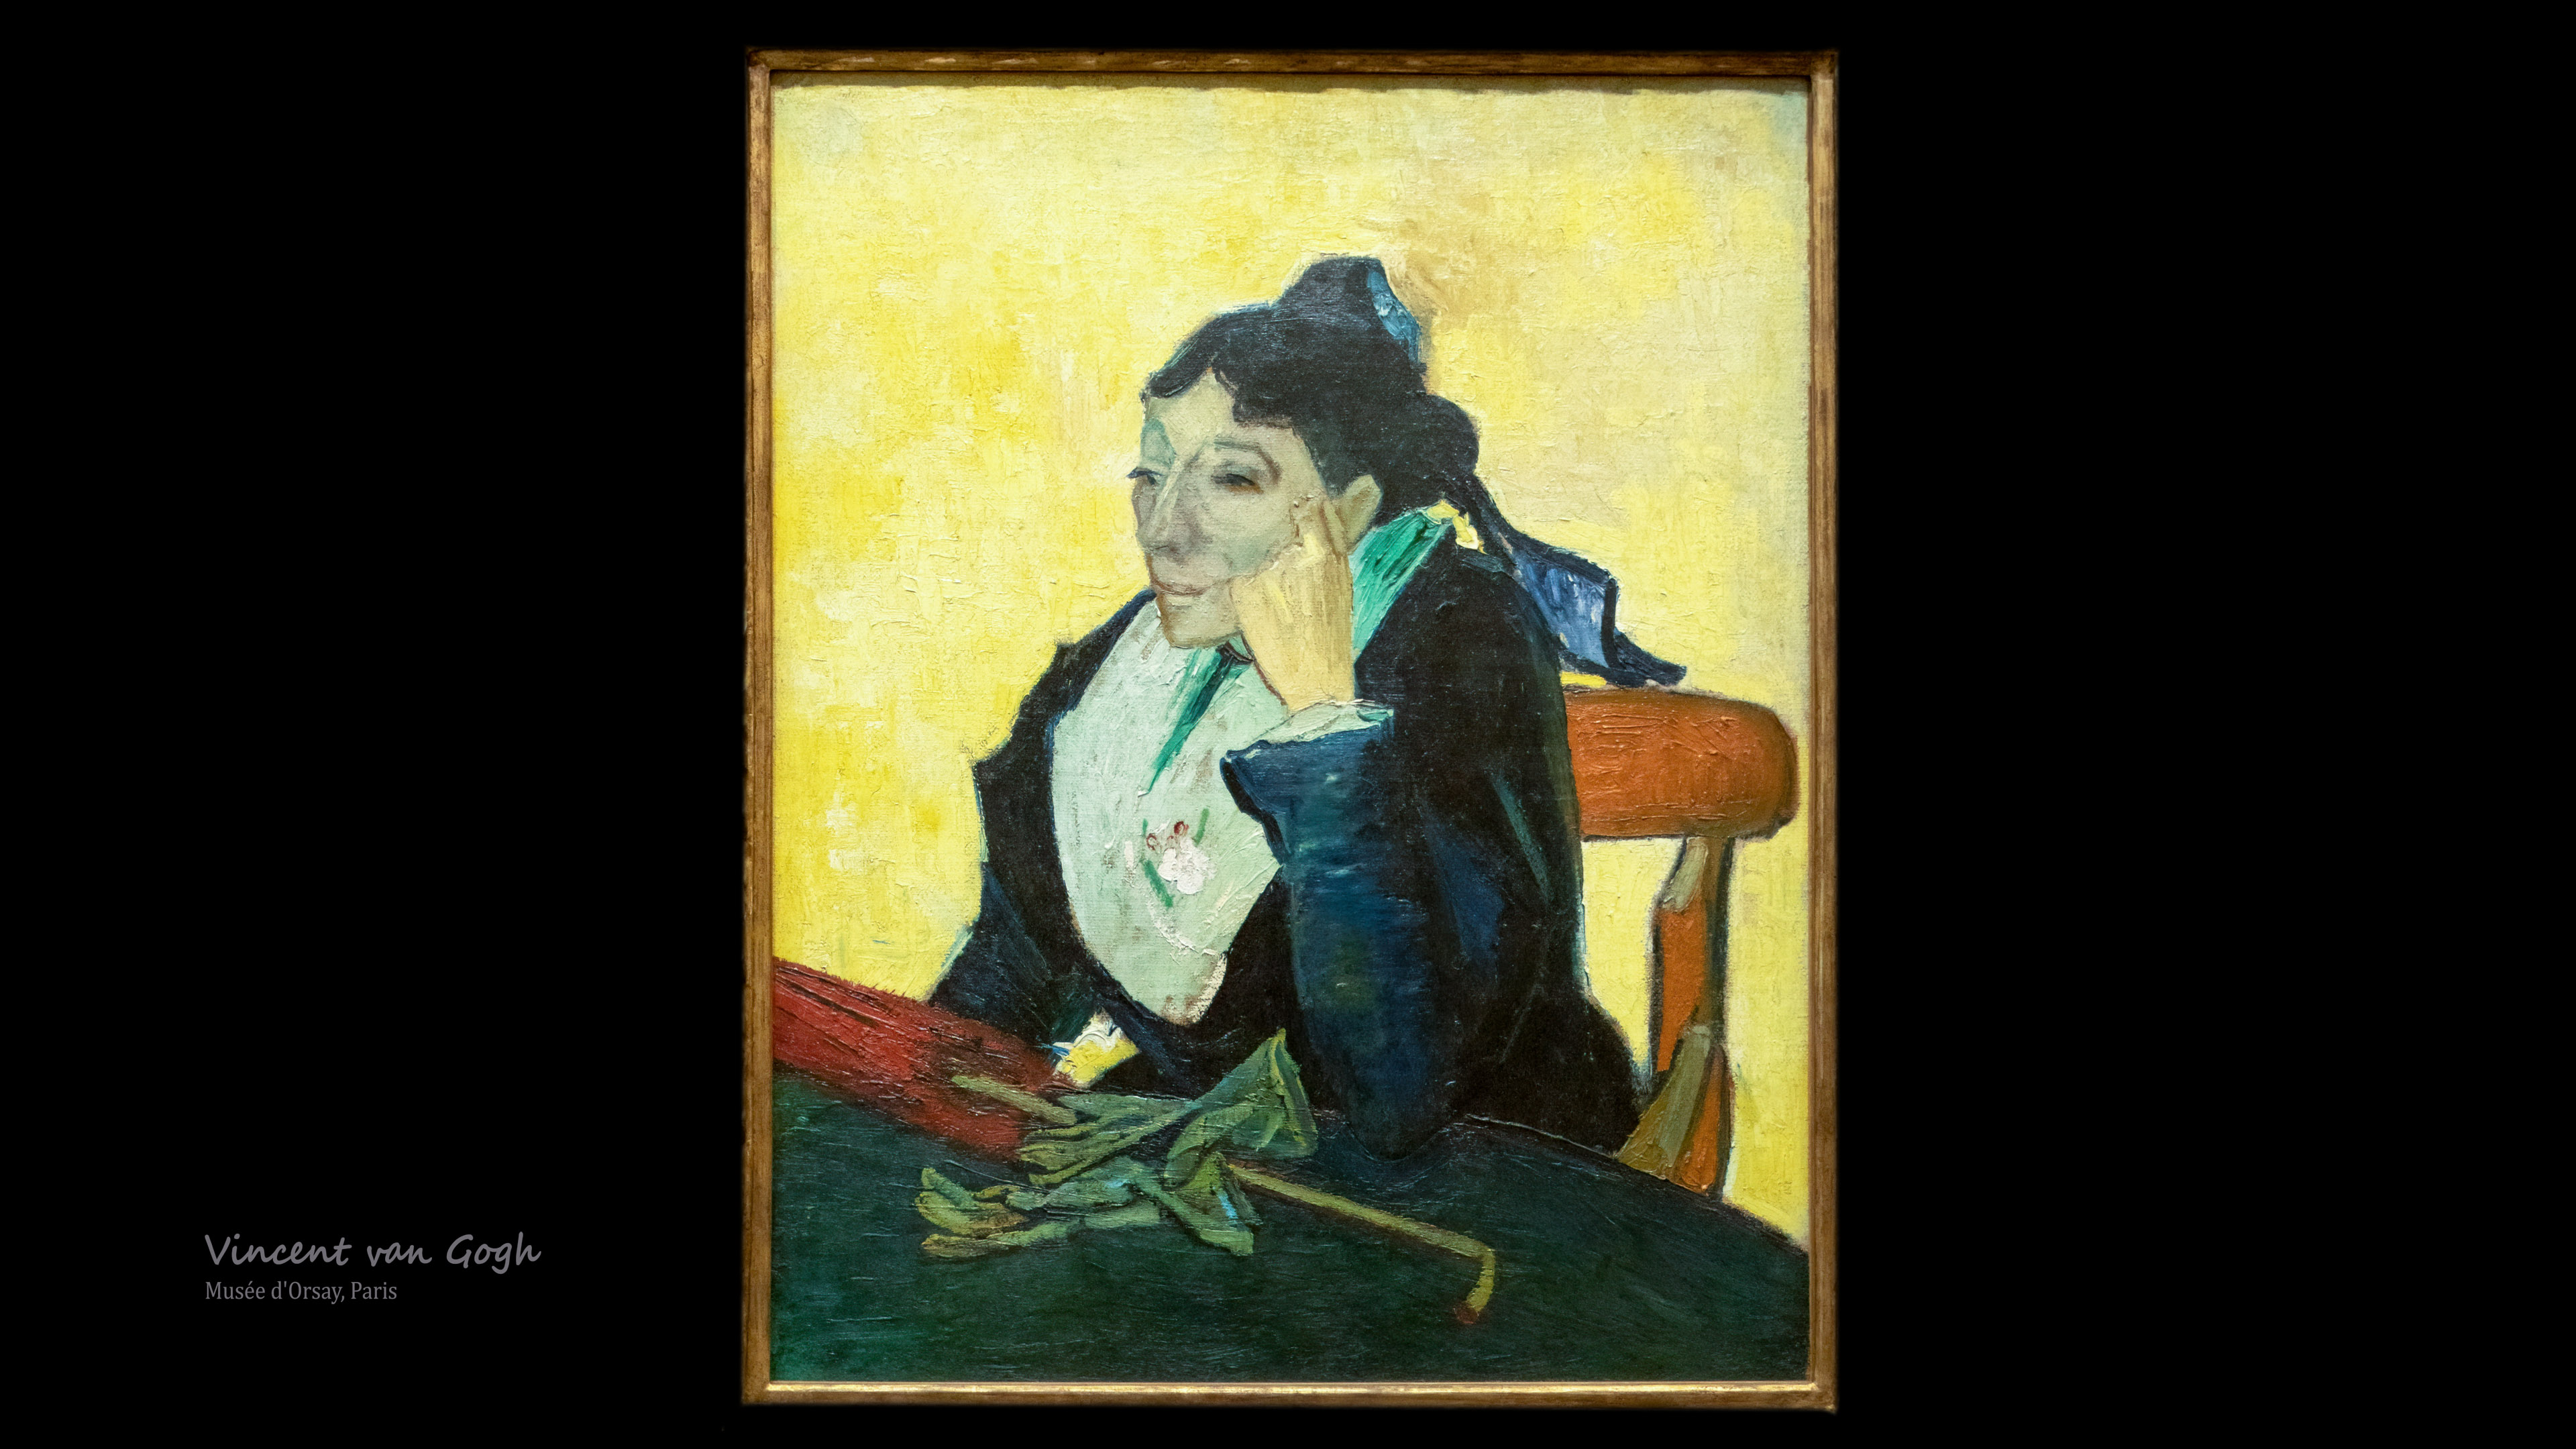 Admire the elegance and charm of L’Arlésienne desktop wallpaper, featuring the portrait of a young woman from Arles that Van Gogh painted in 1890, using bright and contrasting colors.